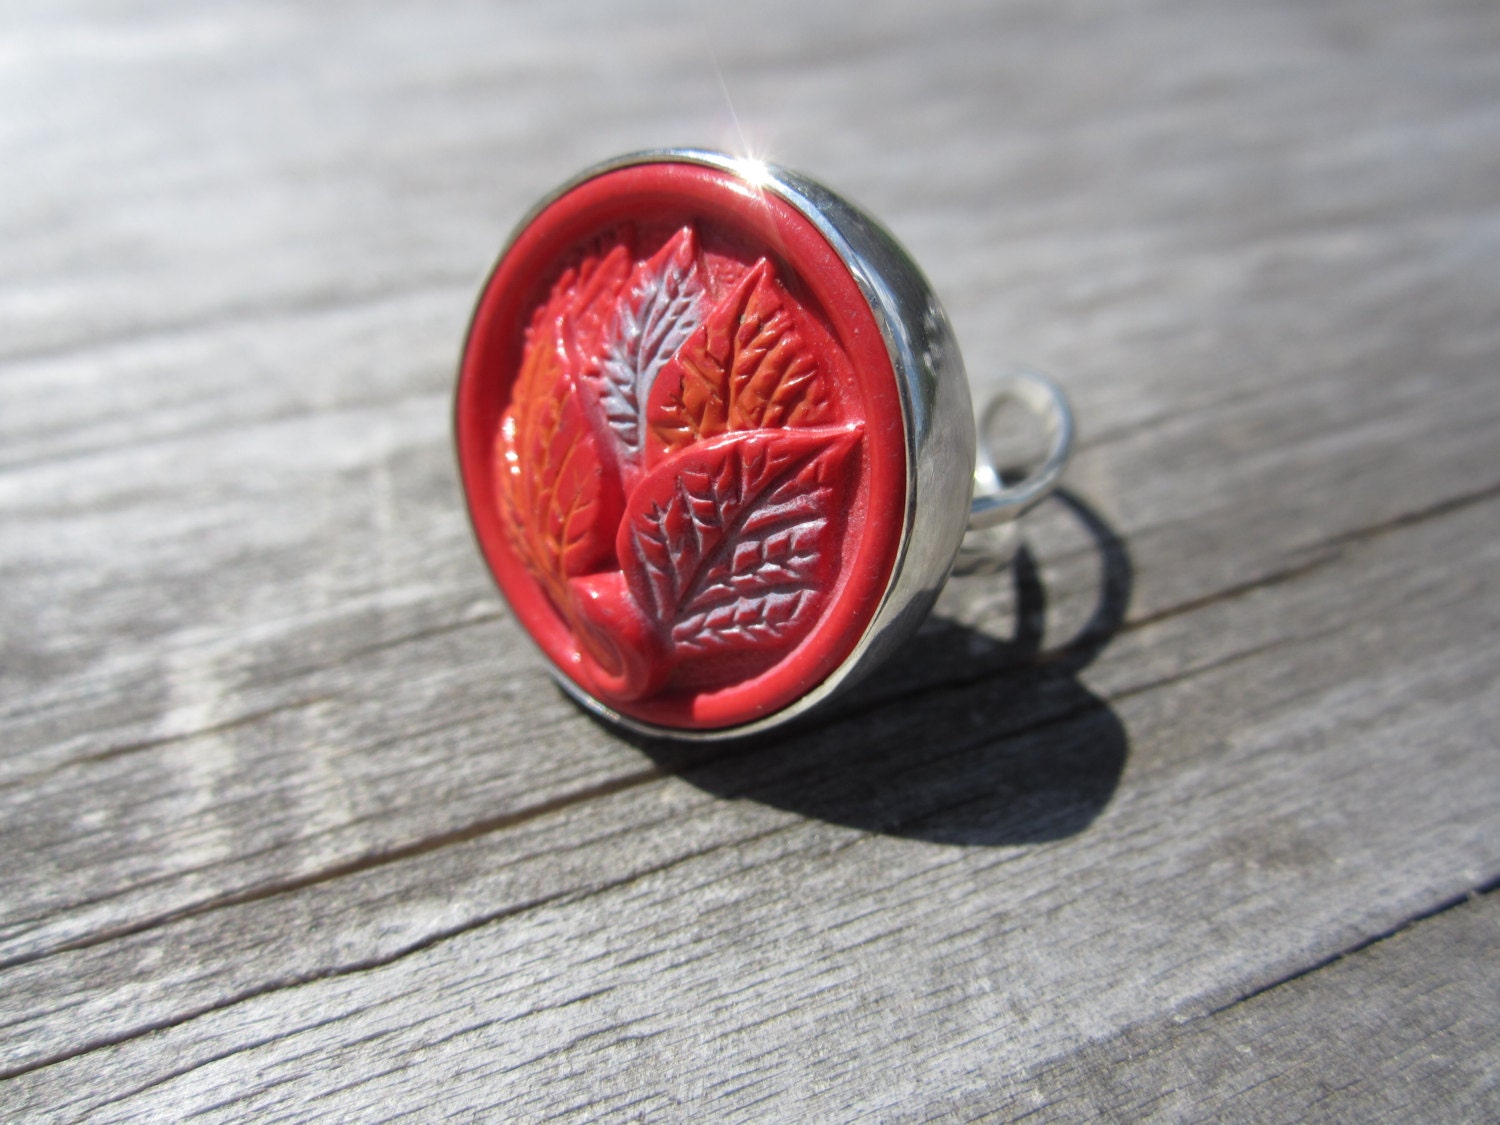 Eco Friendly Vintage Button Statement Ring Sterling Silver Hand Fabricated Bezel Set Adjustable One Of A Kind Red Orange Light Blue Leaves - MadMeadowMetals